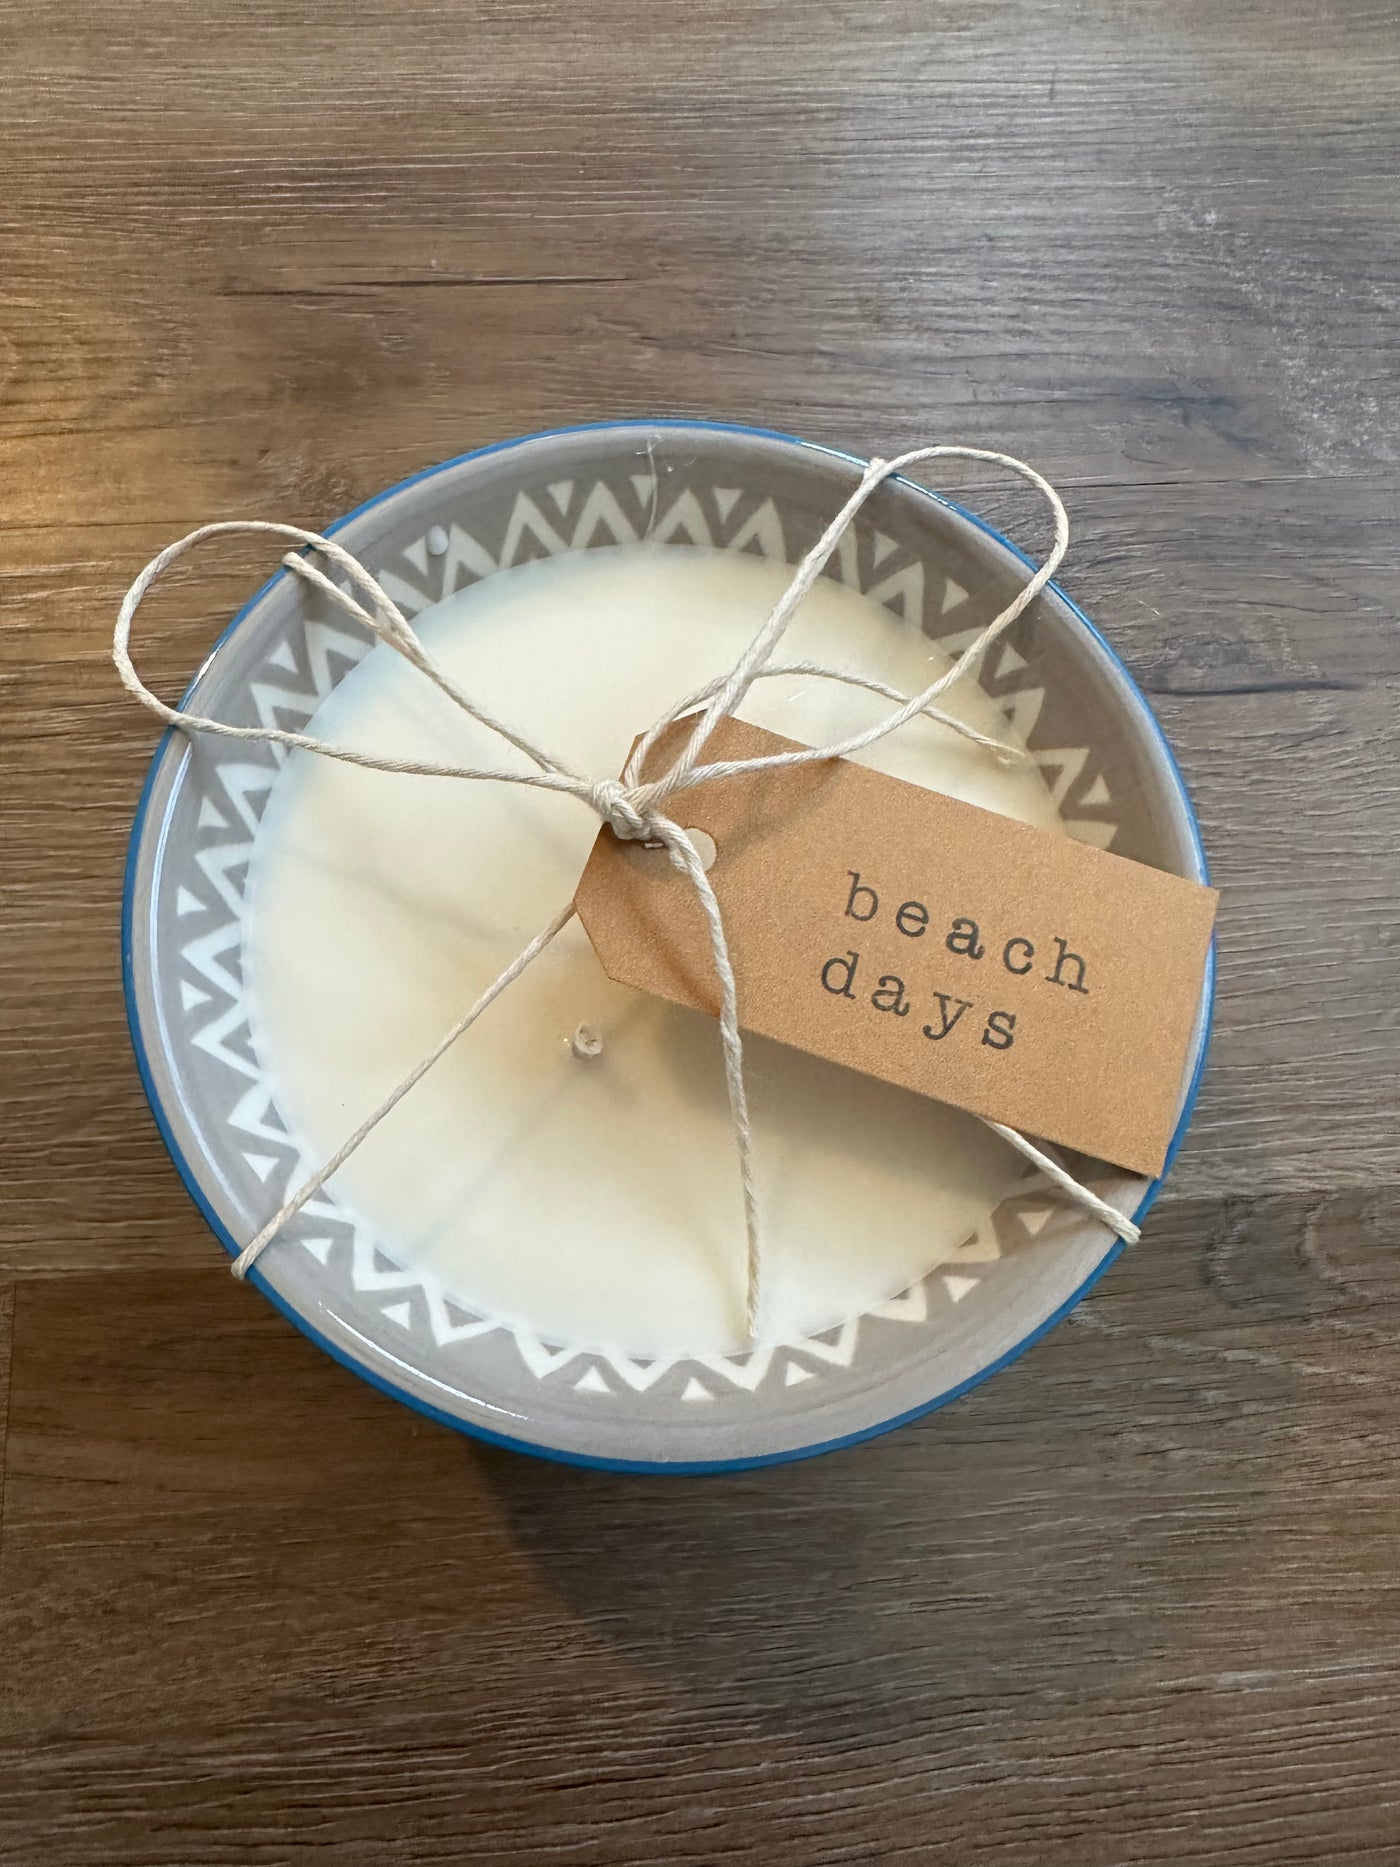 (BEACH DAYS) GREY, WHITE & BLUE BOWL WITH INTRICATE DESIGNS